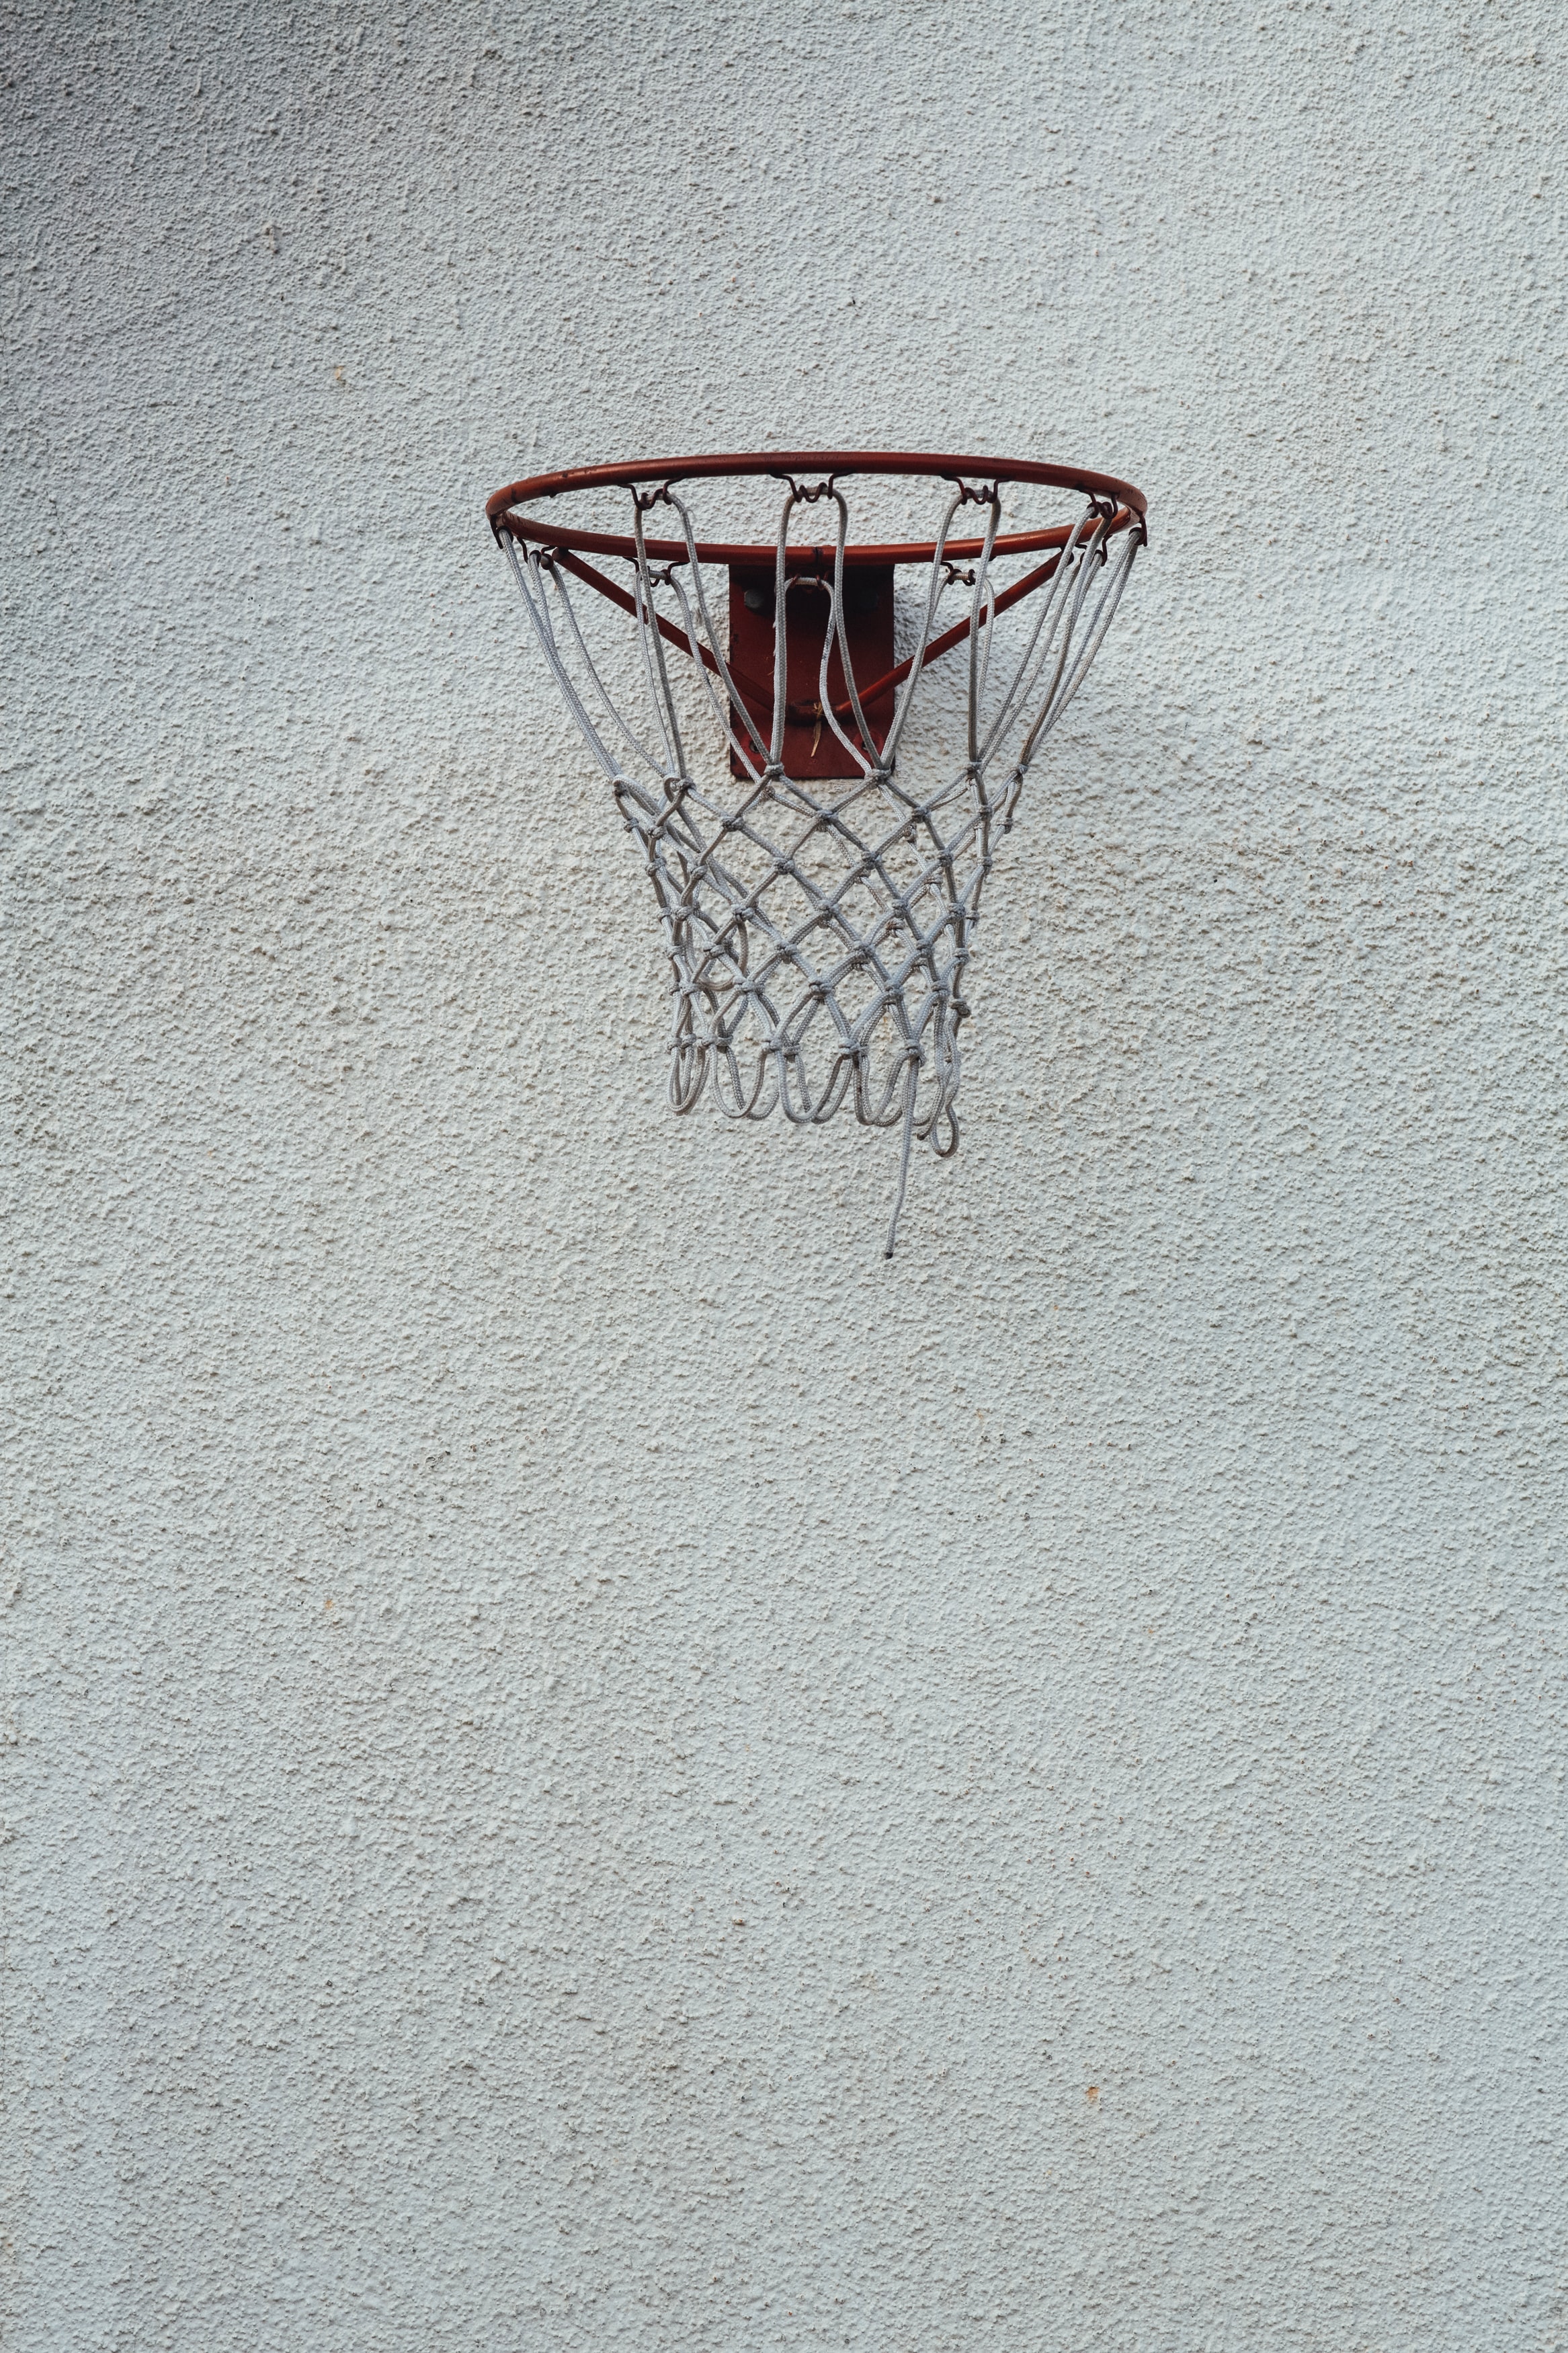 basketball, basketball hoop, basketball ring, miscellanea, miscellaneous, grid, wall